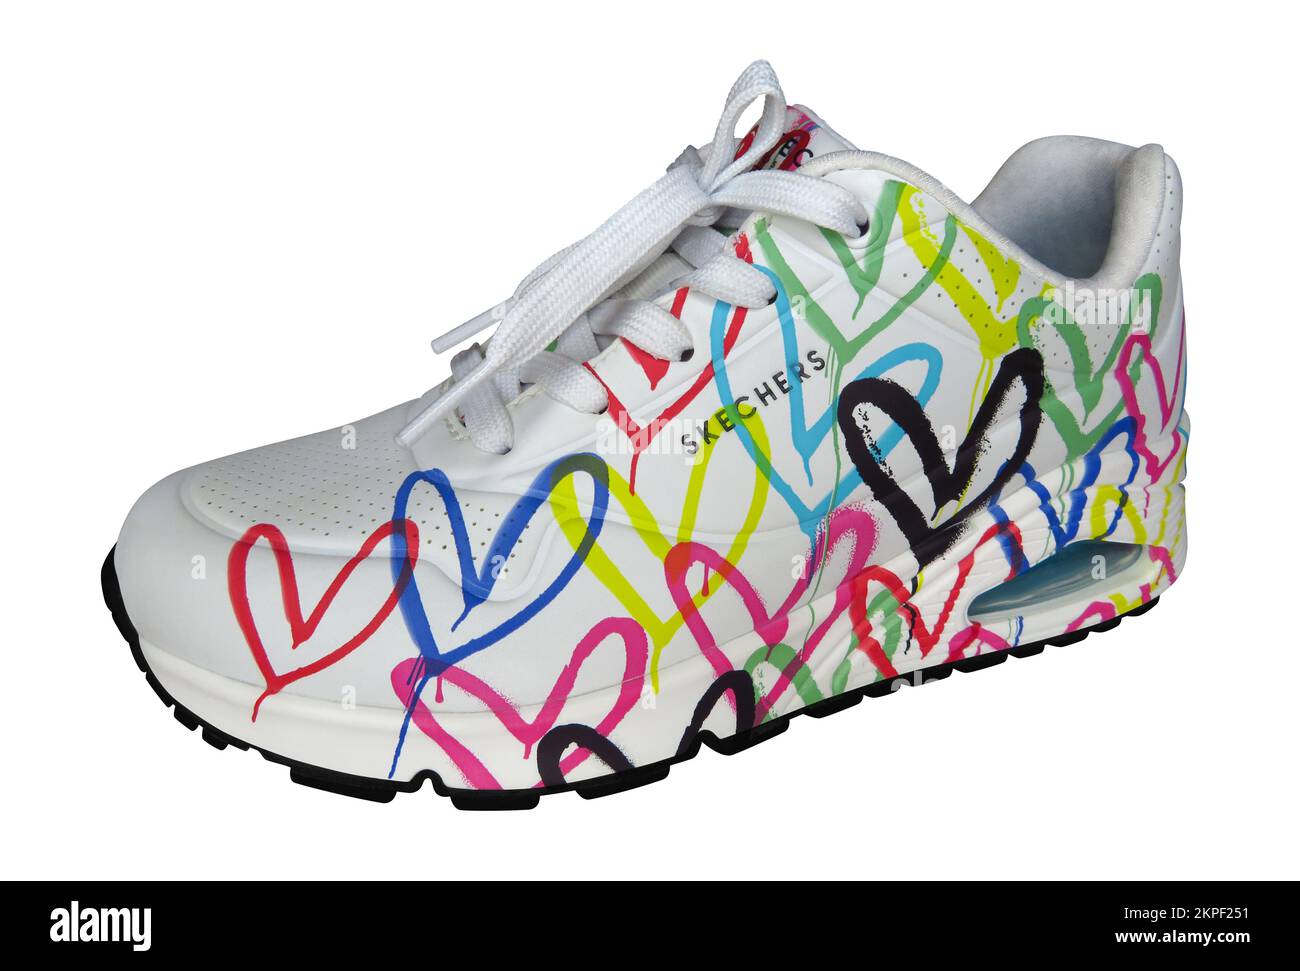 Skechers shoes Cut Out Stock Images & Pictures - Alamy